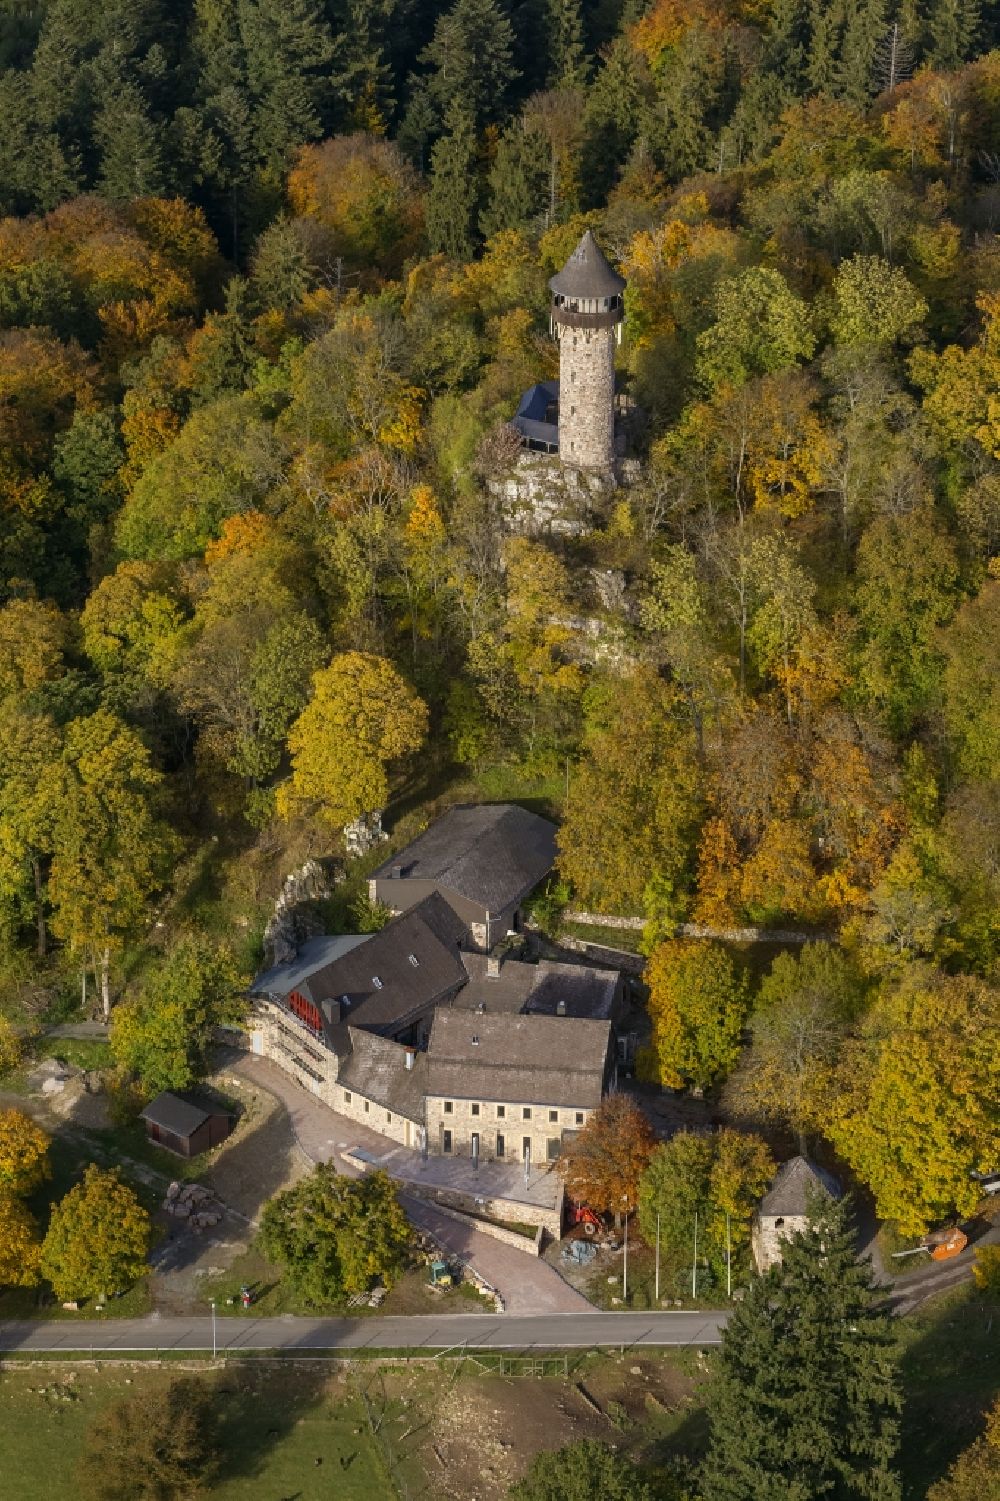 Kempfeld from the bird's eye view: Autumn - Landscape at the tower on the ruins of the castle in the wild nature reserve Wildenburg near Kempfeld in Rhineland-Palatinate